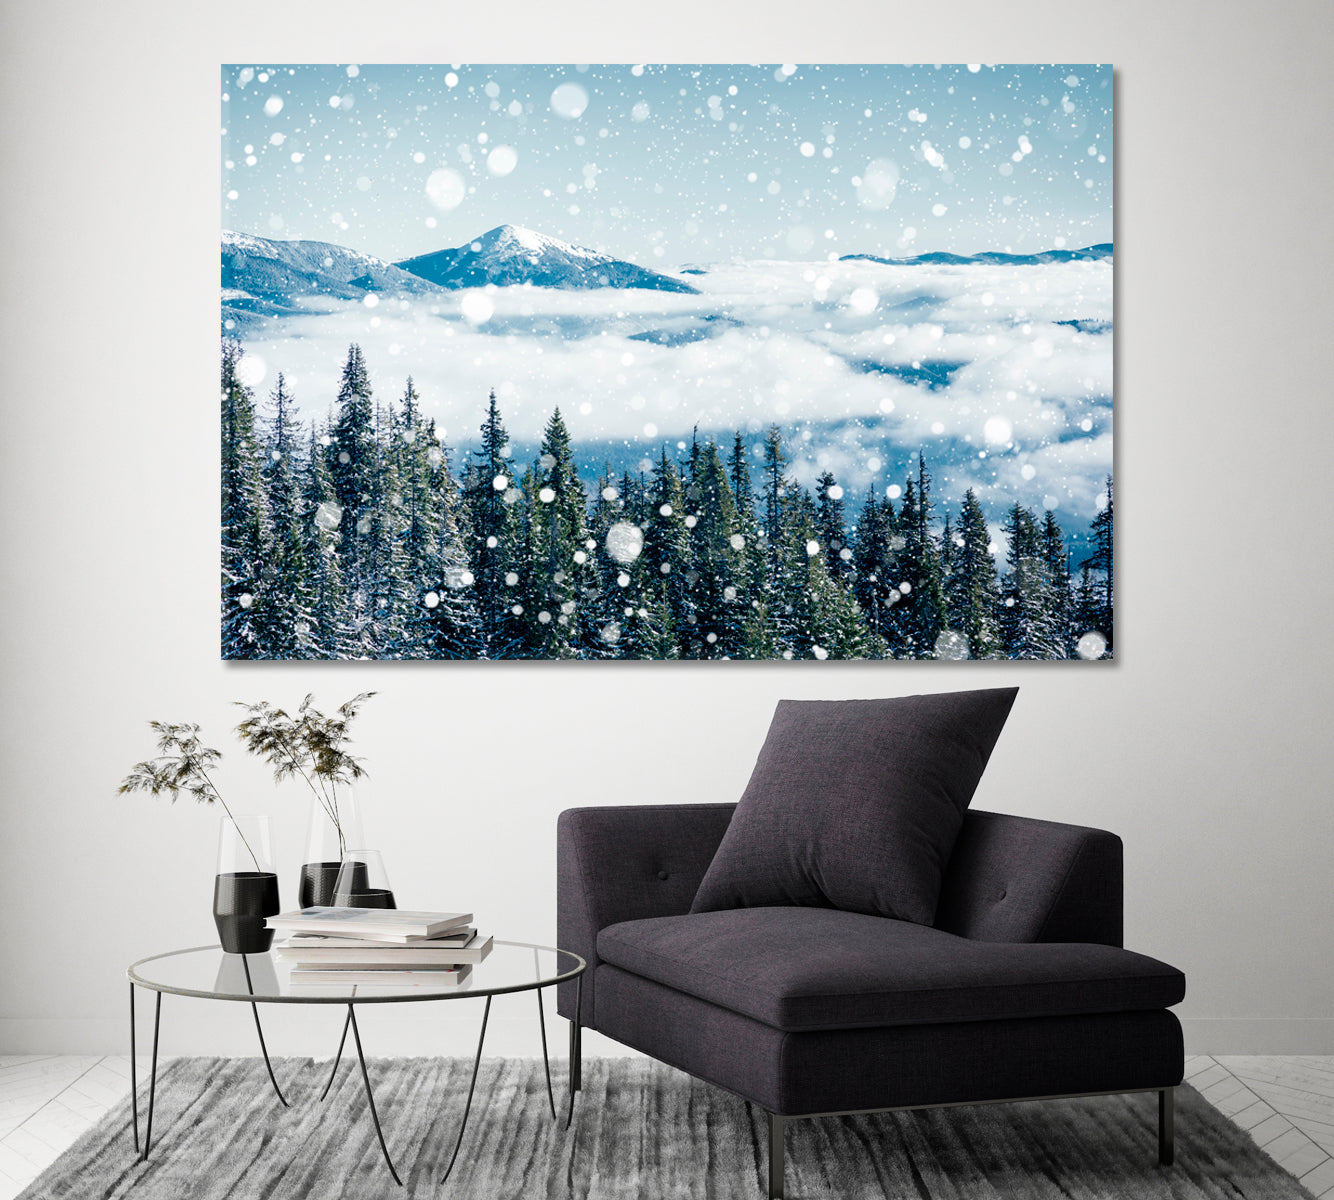 Snowy Coniferous Forest in Carpathian Mountains Ukraine Canvas Print ArtLexy 1 Panel 24"x16" inches 